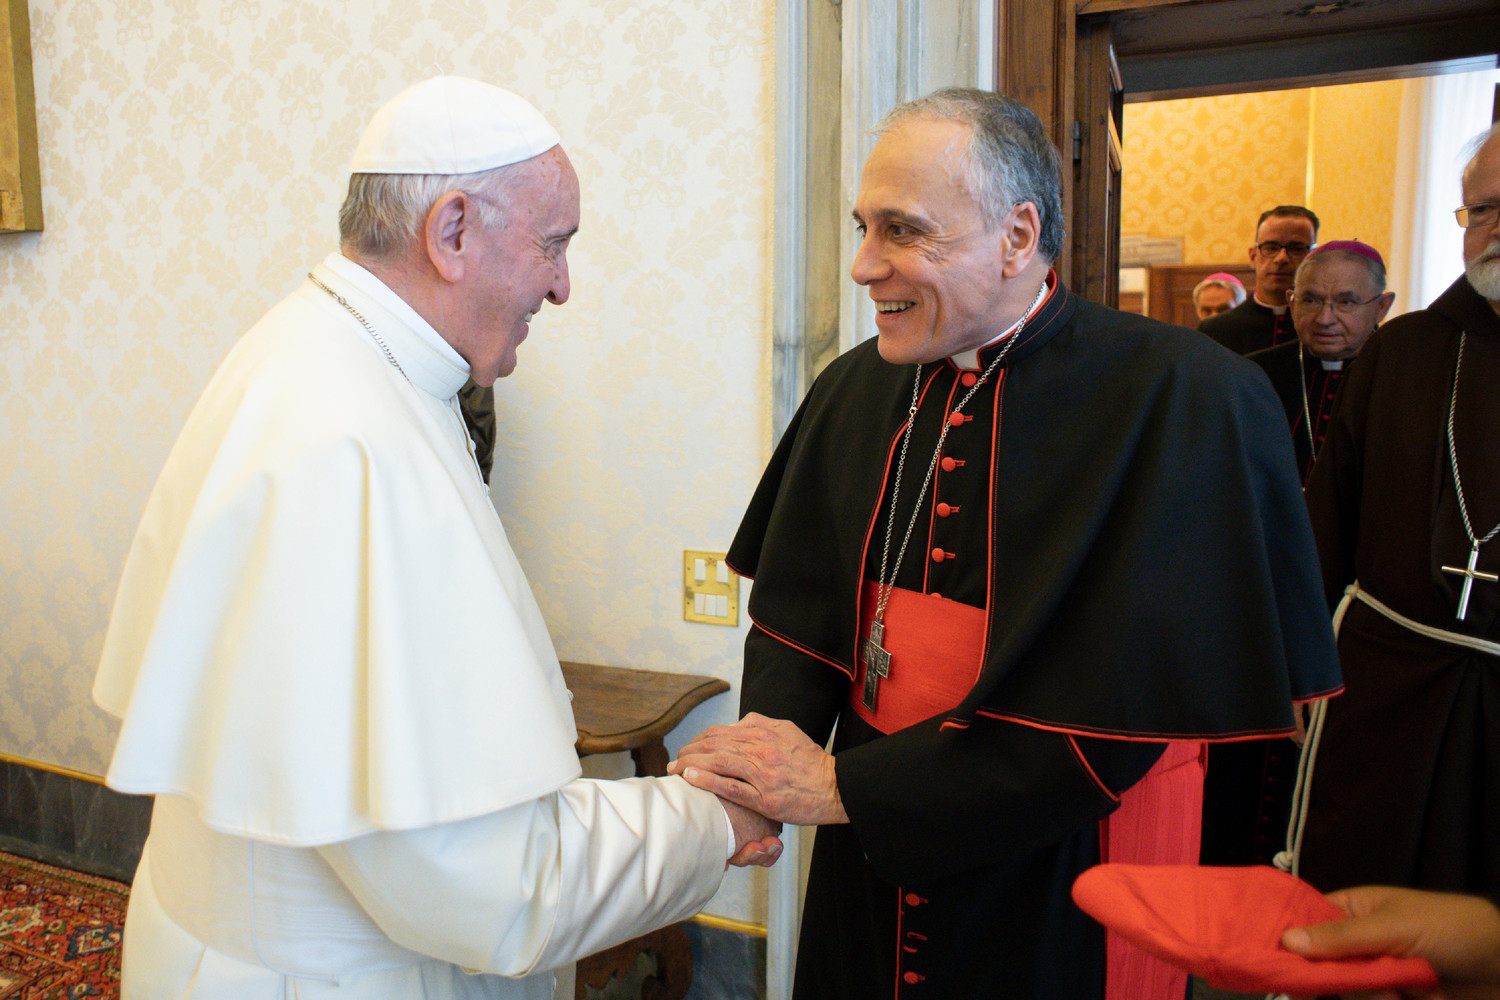 Pope Francis greets Cardinal Daniel N. DiNardo of Galveston-Houston, president of the U.S. Conference of Catholic Bishops, during a meeting with officials of the conference at the Vatican Sept. 13. Also pictured are Cardinal Sean P. O’Malley of Boston, president of the Pontifical Commission for the Protection of Minors, Archbishop Jose H. Gomez of Los Angeles, vice president of the conference, and Msgr. J. Brian Bransfield, general secretary of the conference.